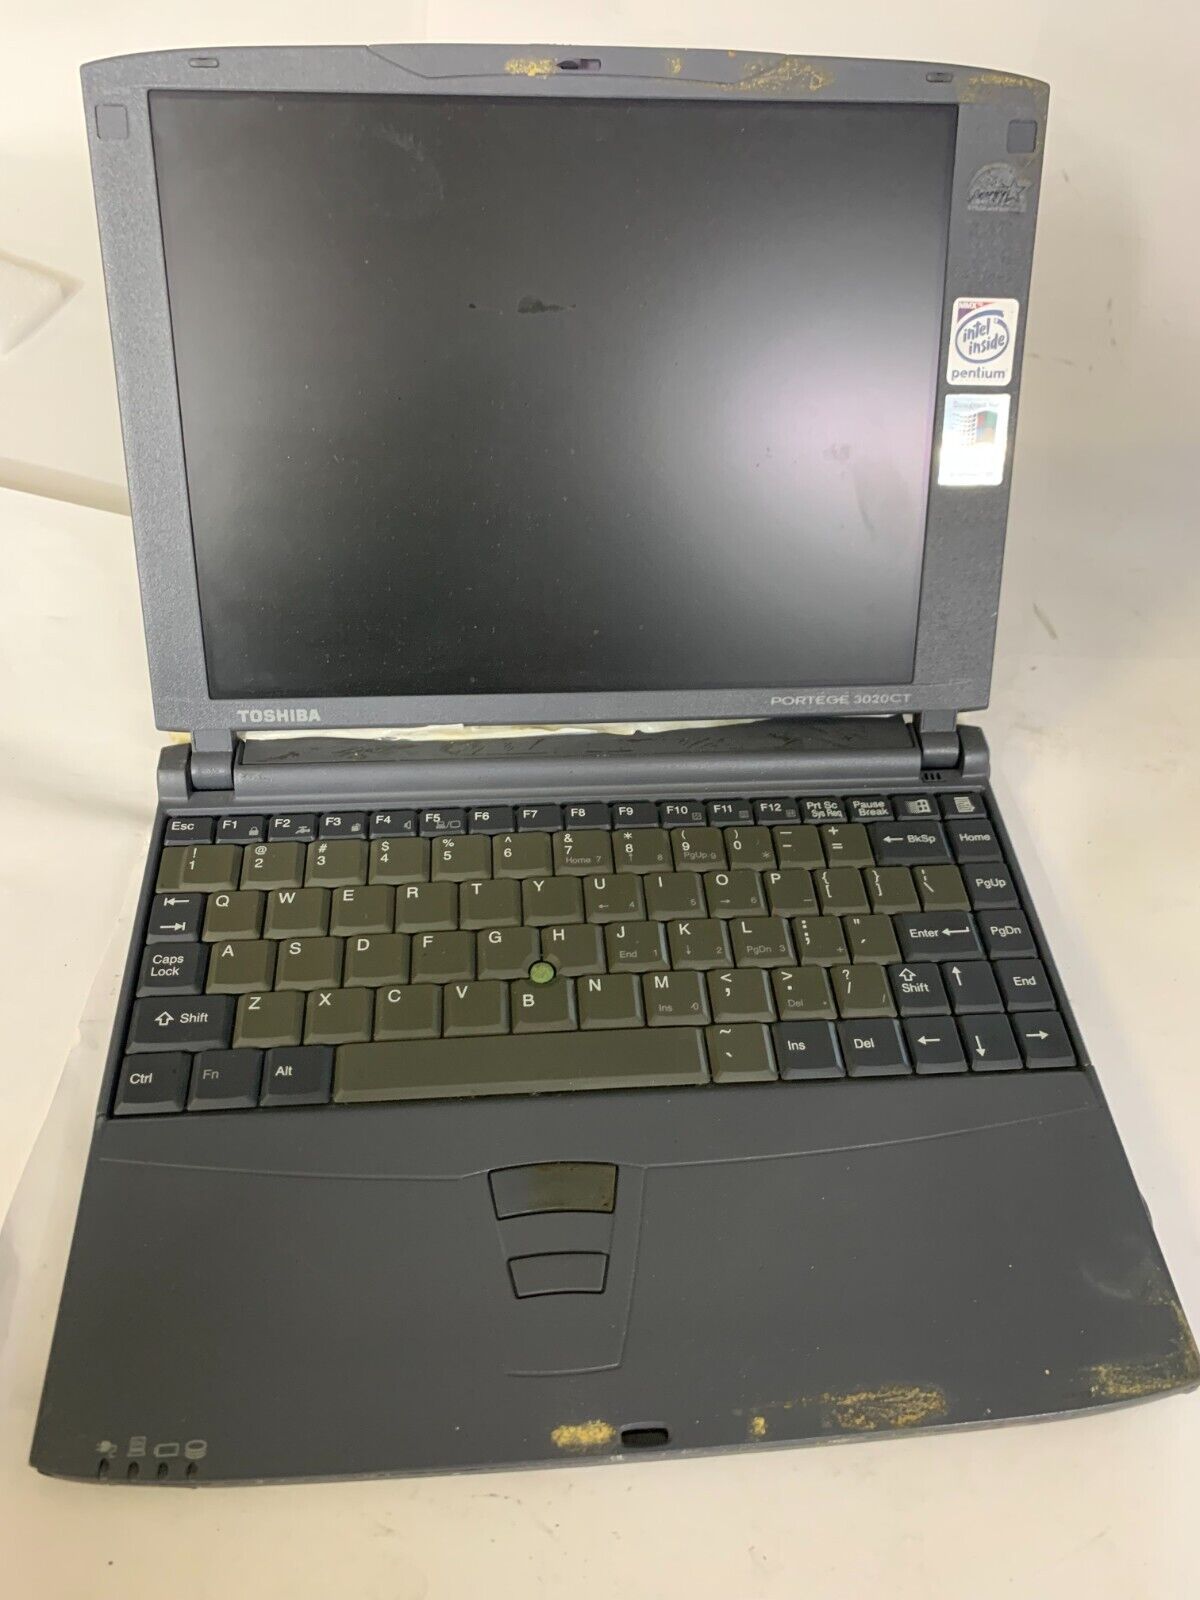 VINTAGE TOSHIBA LAPTOP Computers for parts, MANY models, See Drop-down List